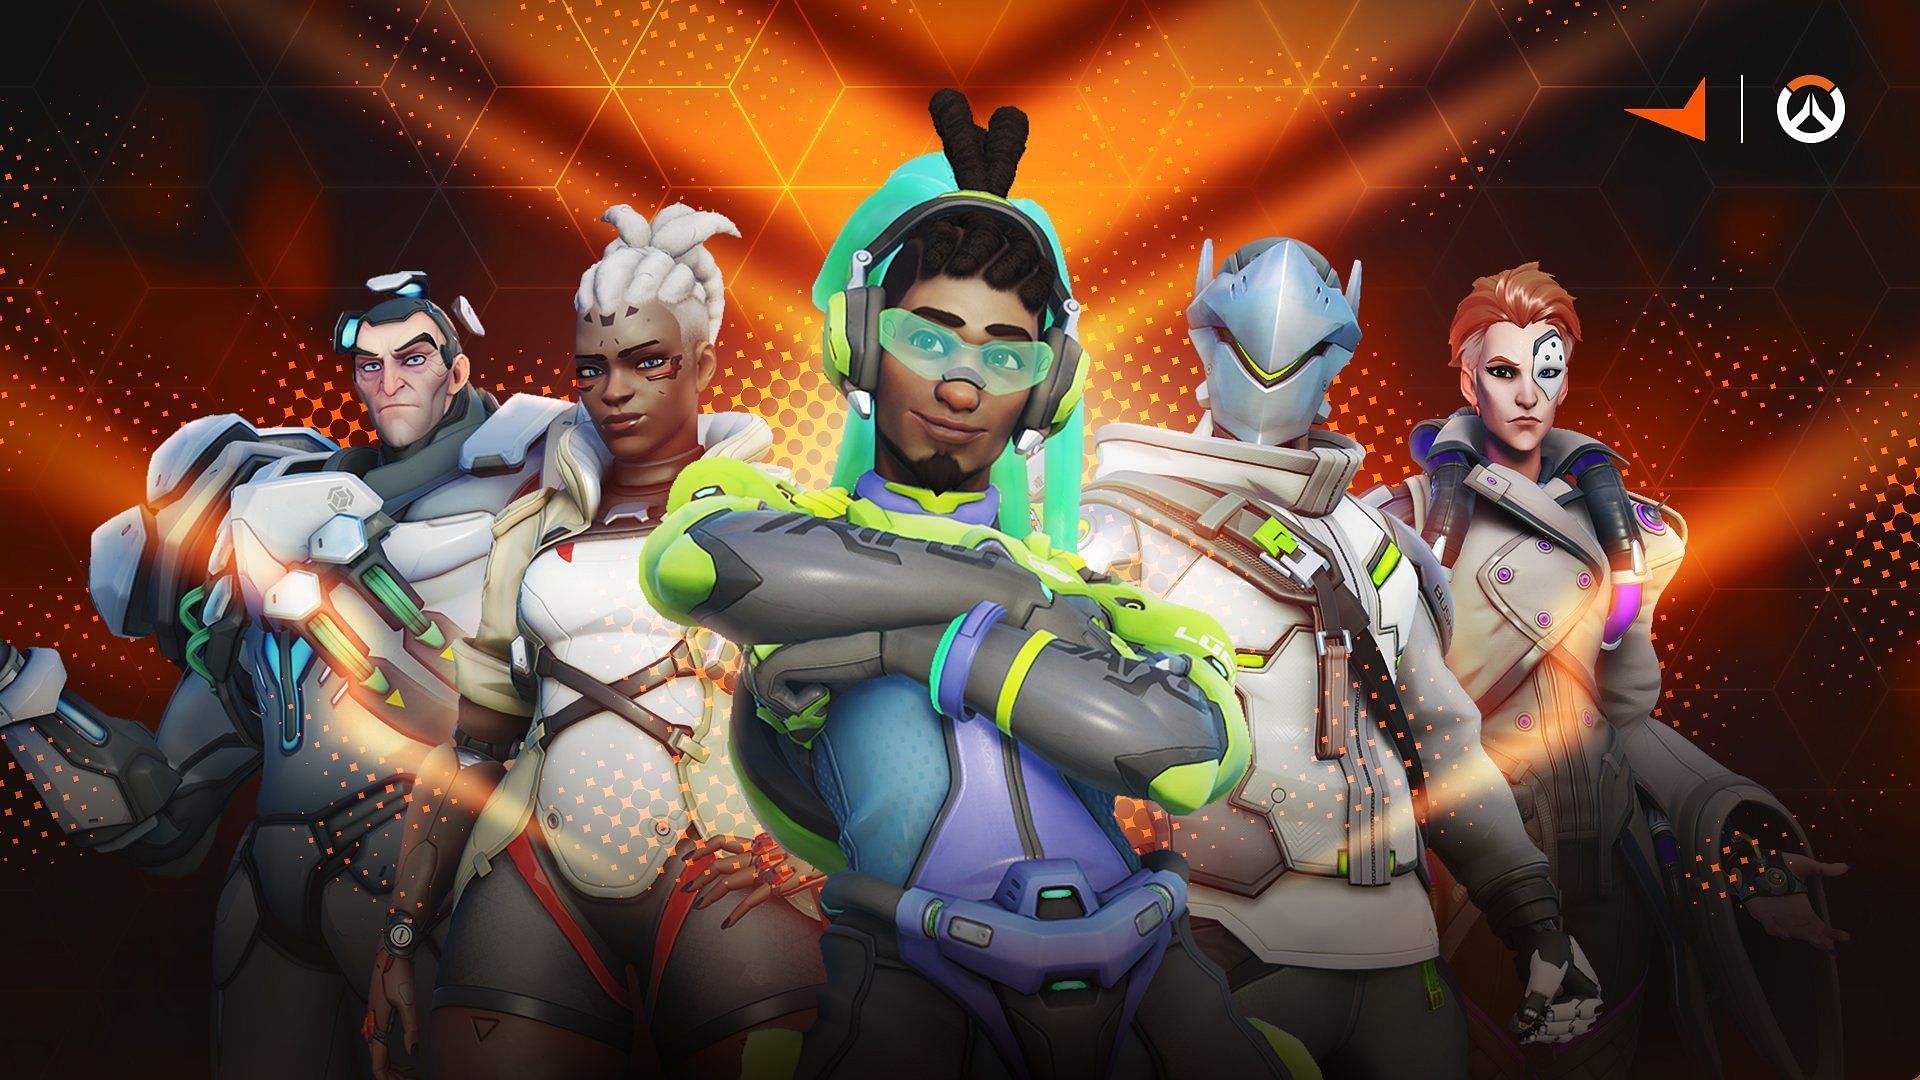 Lucio, Genji, Moira, Sojourn, and Sigma as a cover photo for Overwatch x Faceit collaboration